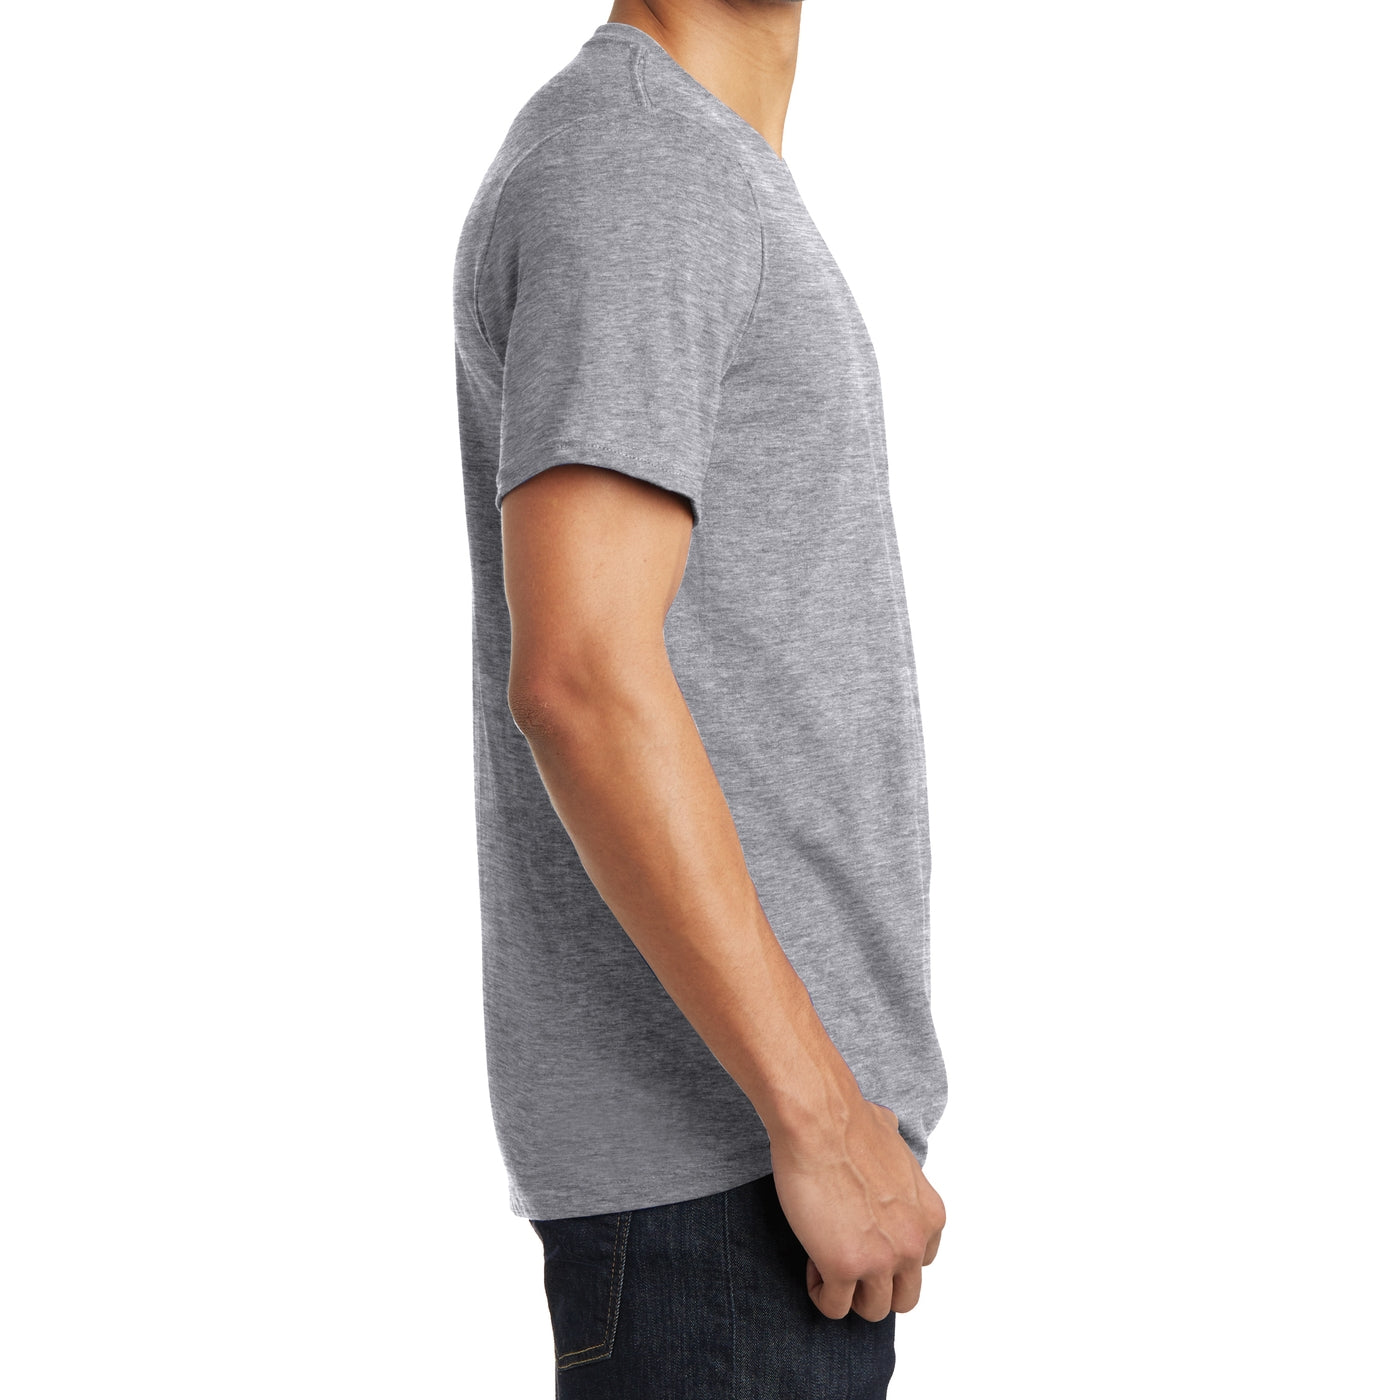 Men's Young The Concert Tee V-Neck - Heather Grey